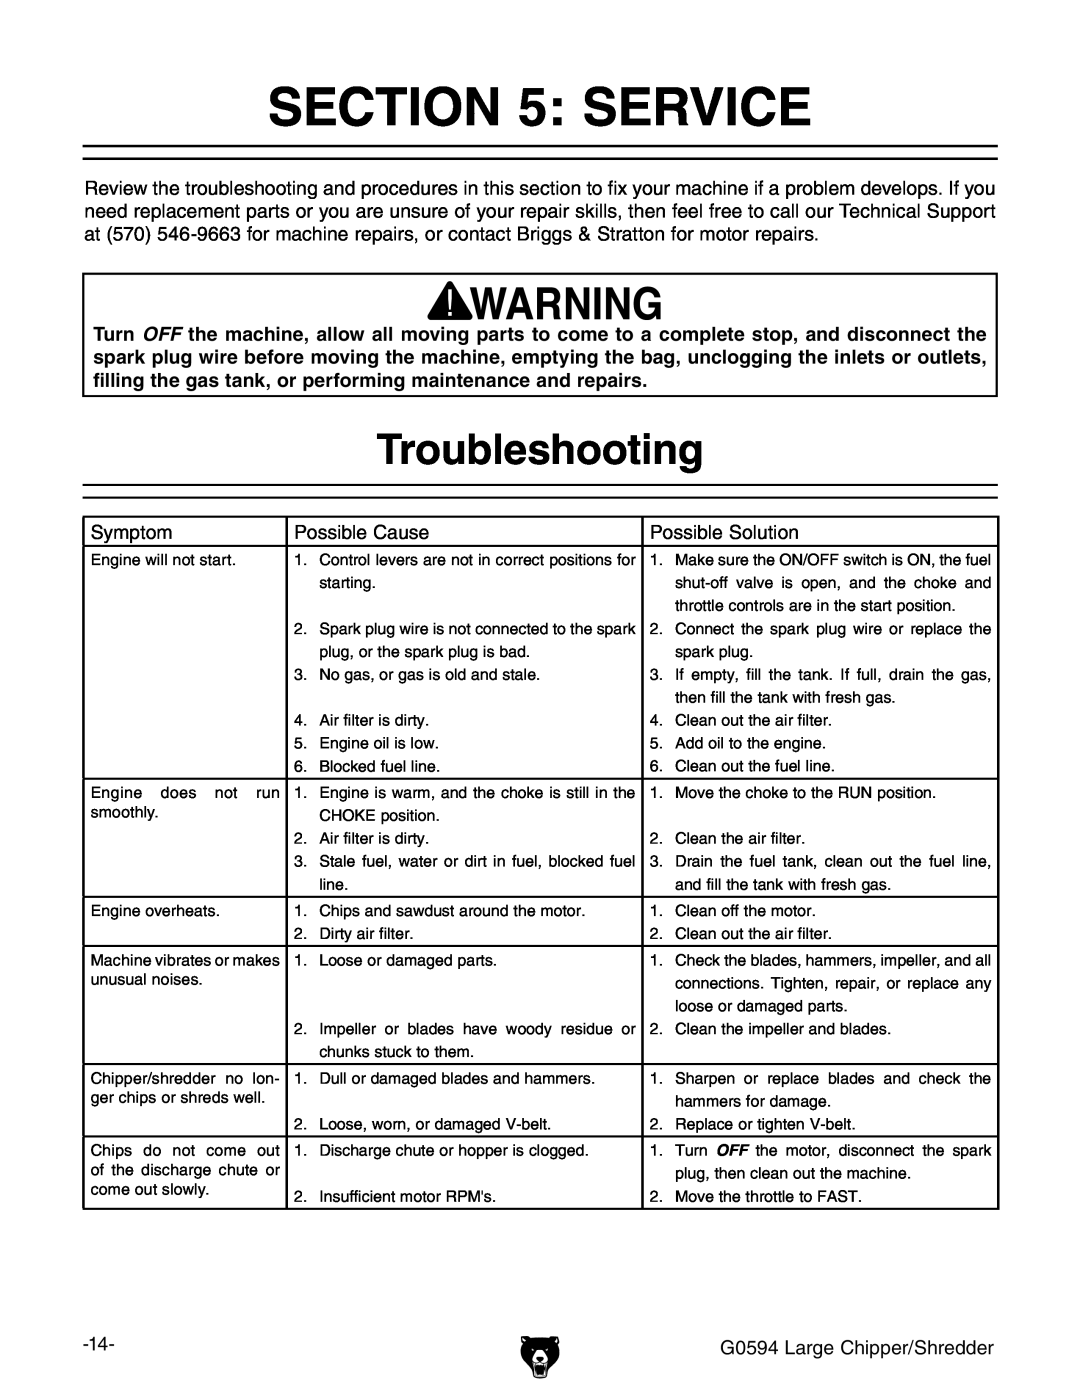 Grizzly G0594 owner manual Service, Troubleshooting 